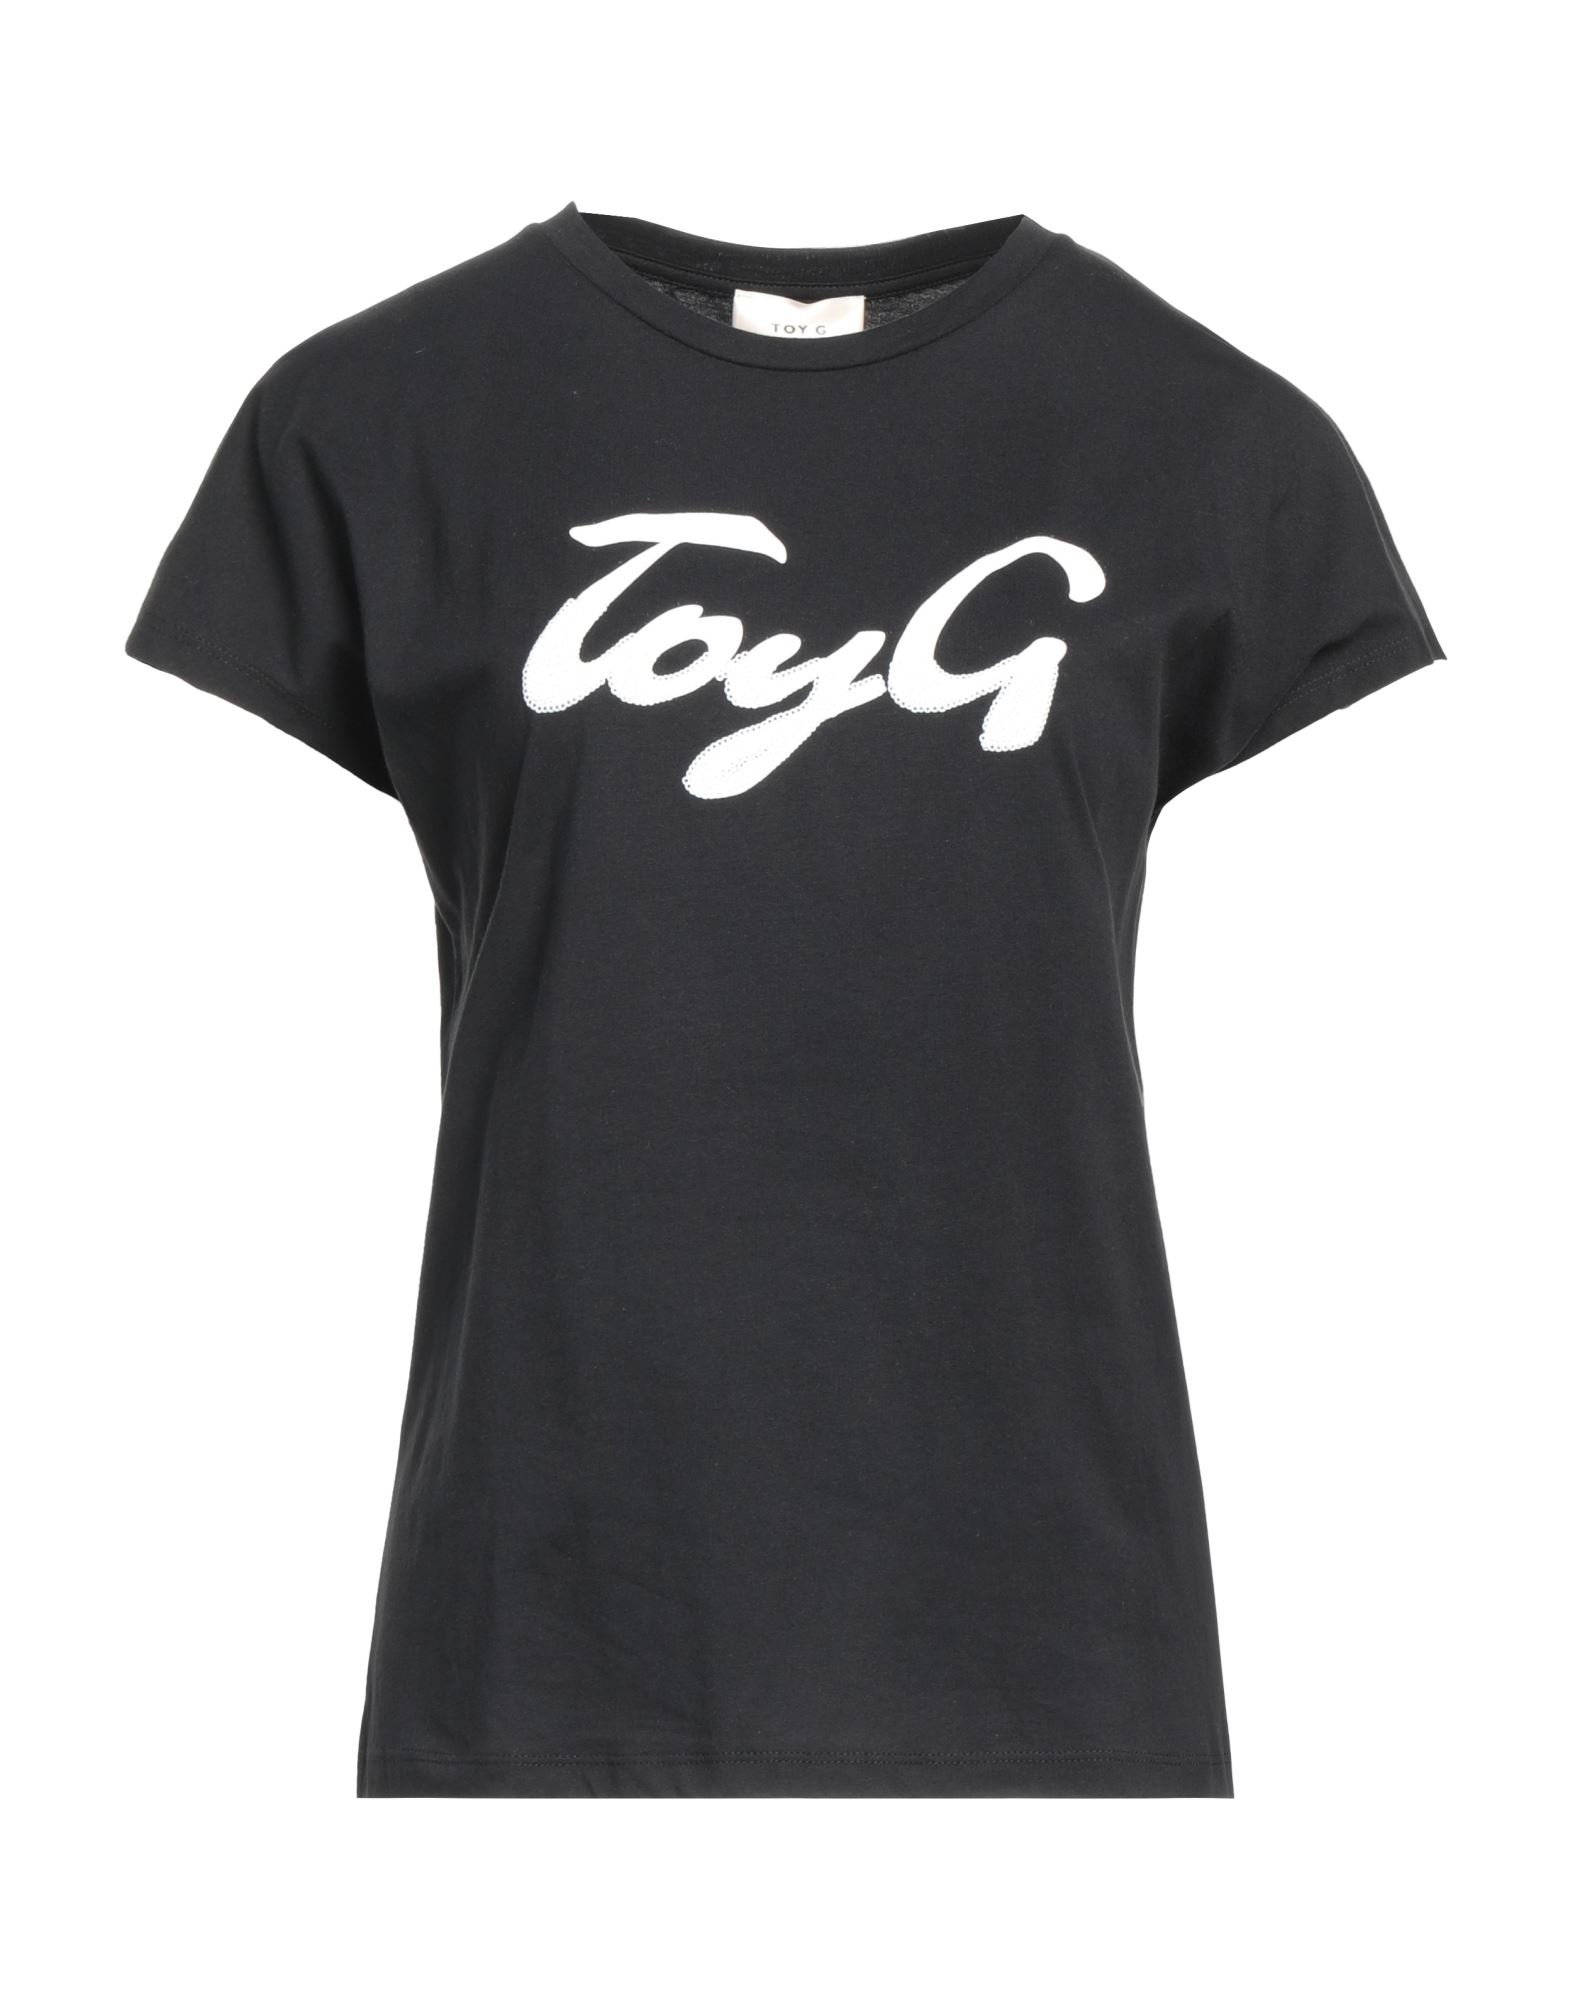 Toy G. T-shirts In Black